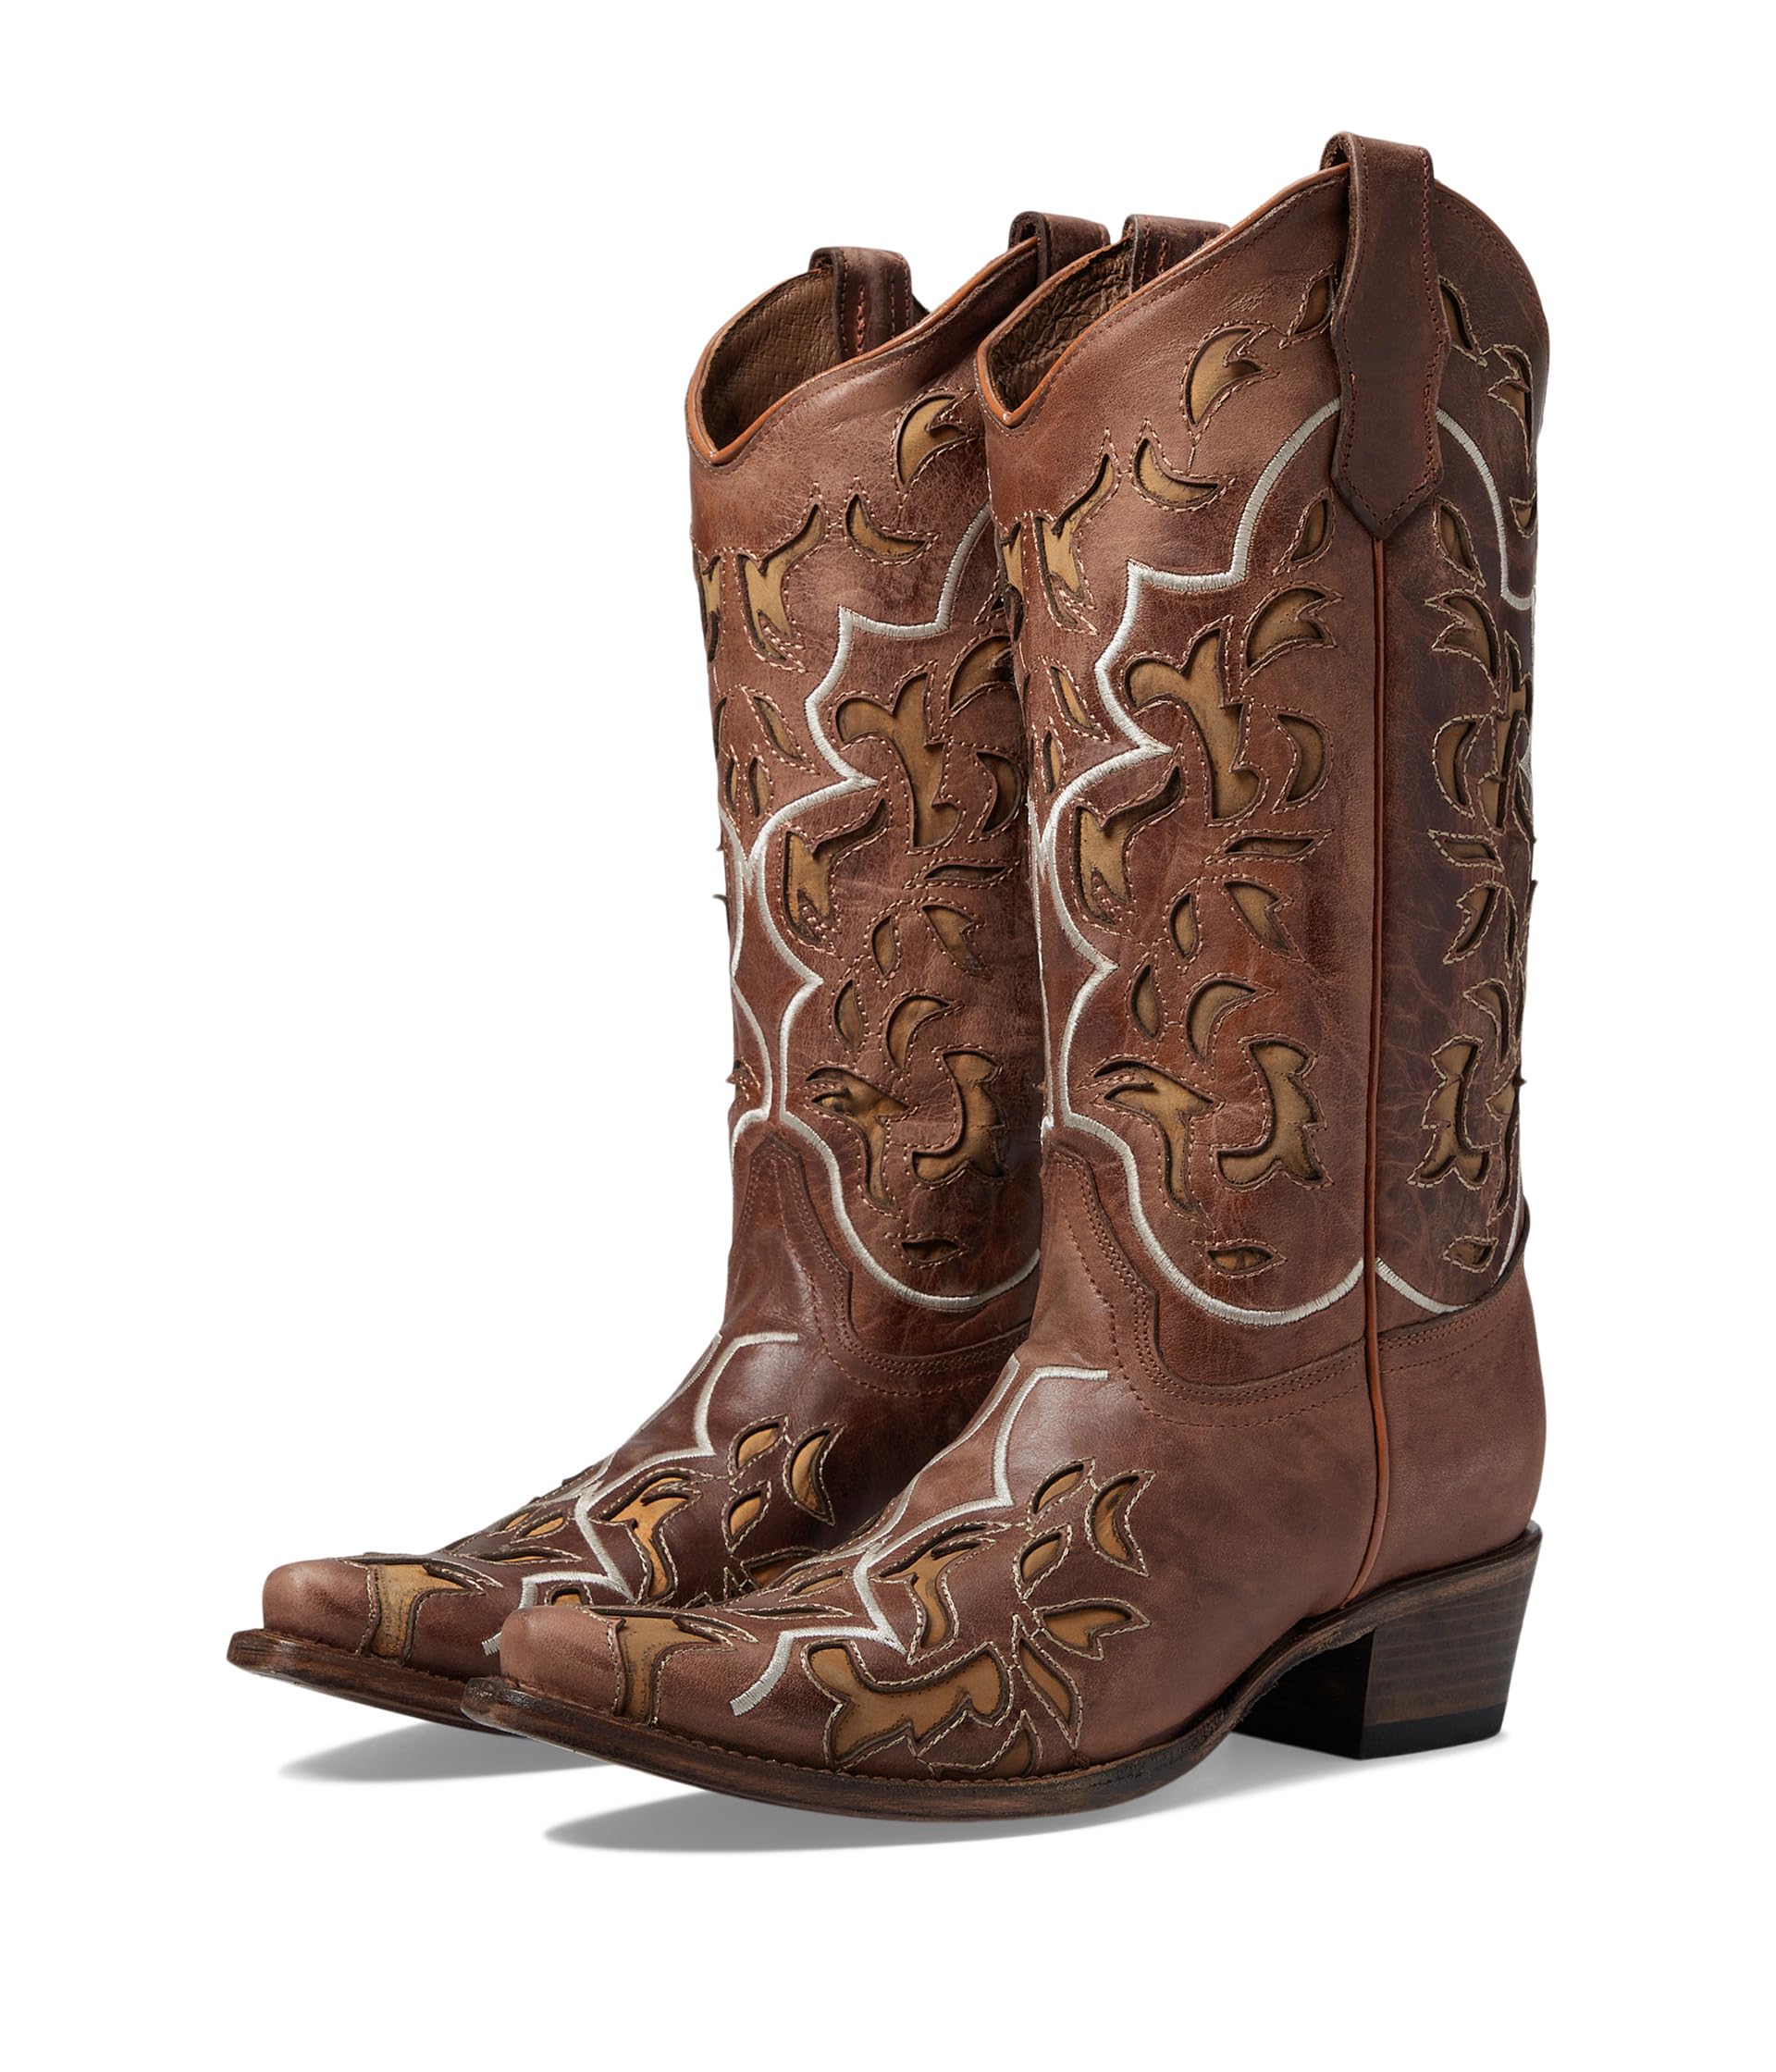 L6035 Corral Boots